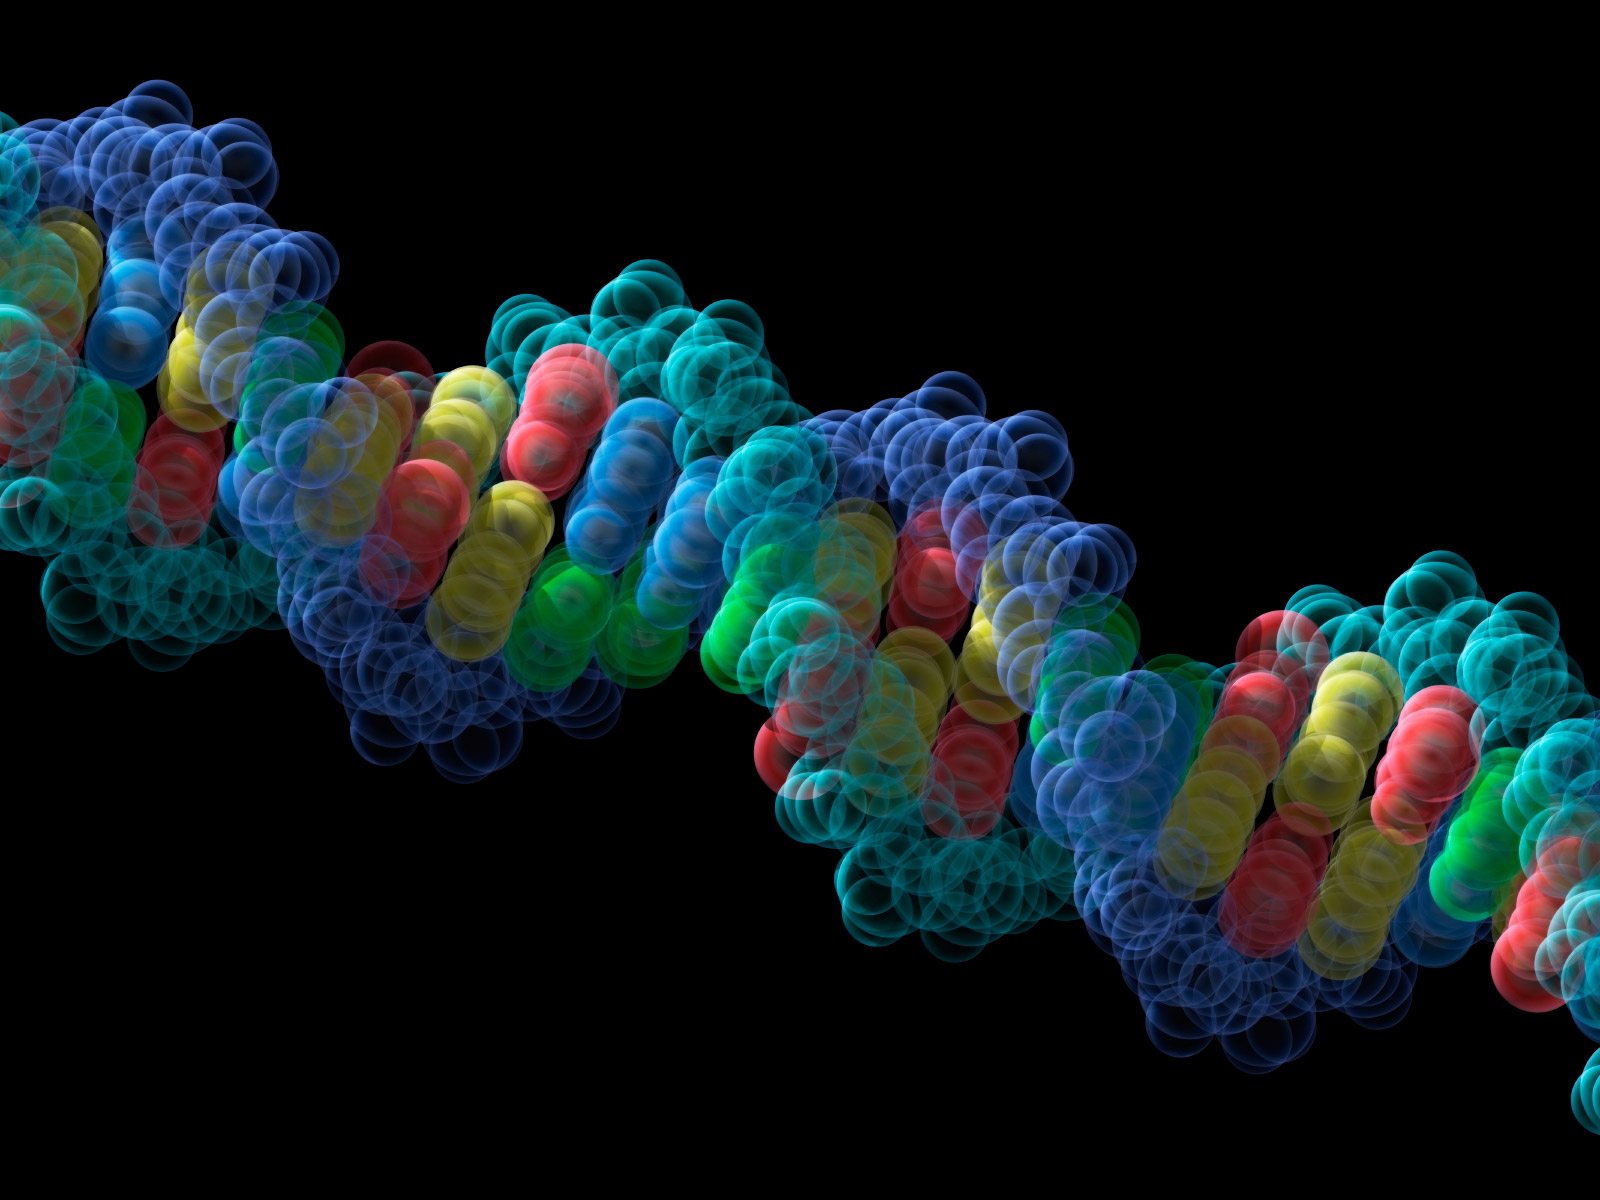 Whole-Genome Analyses Pinpoint Disease Genes in Families | National Institutes of Health (NIH)